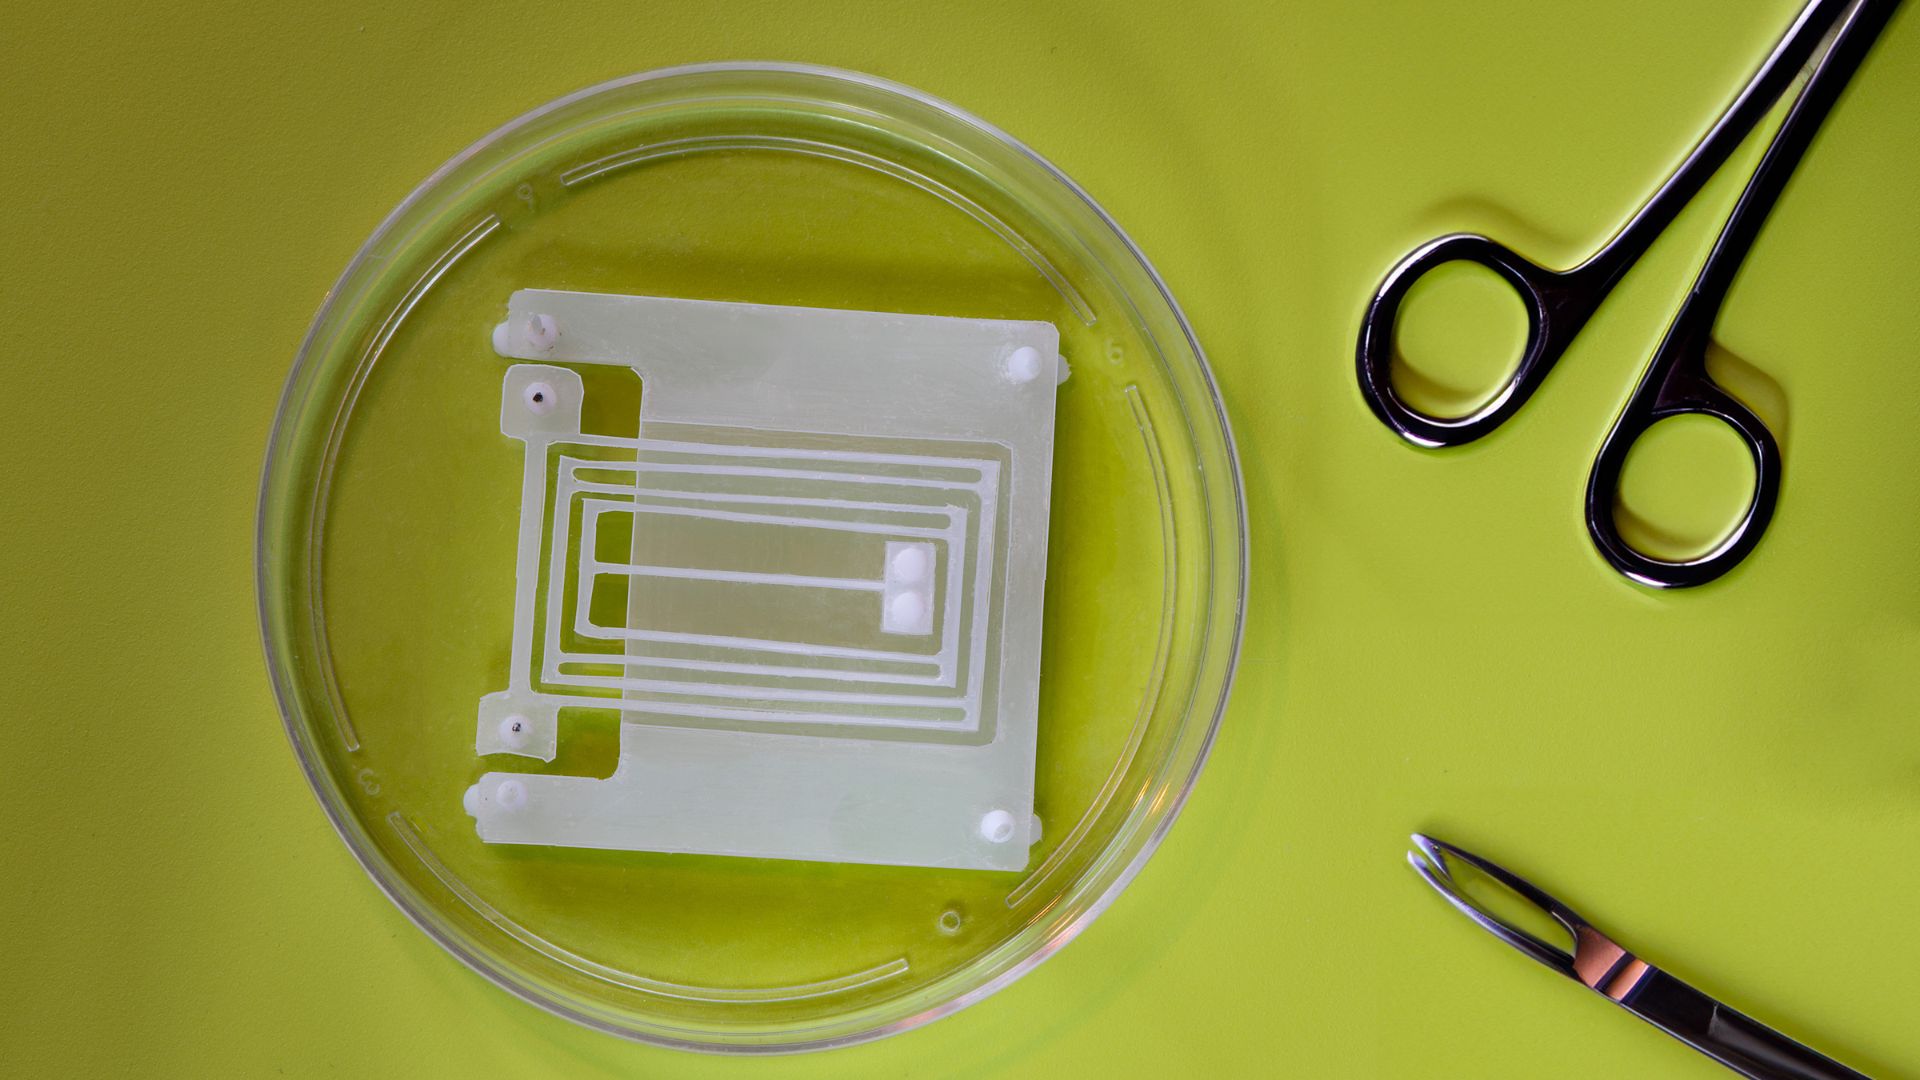 MIT engineers craft spring device to enhance robotic muscles [Video]